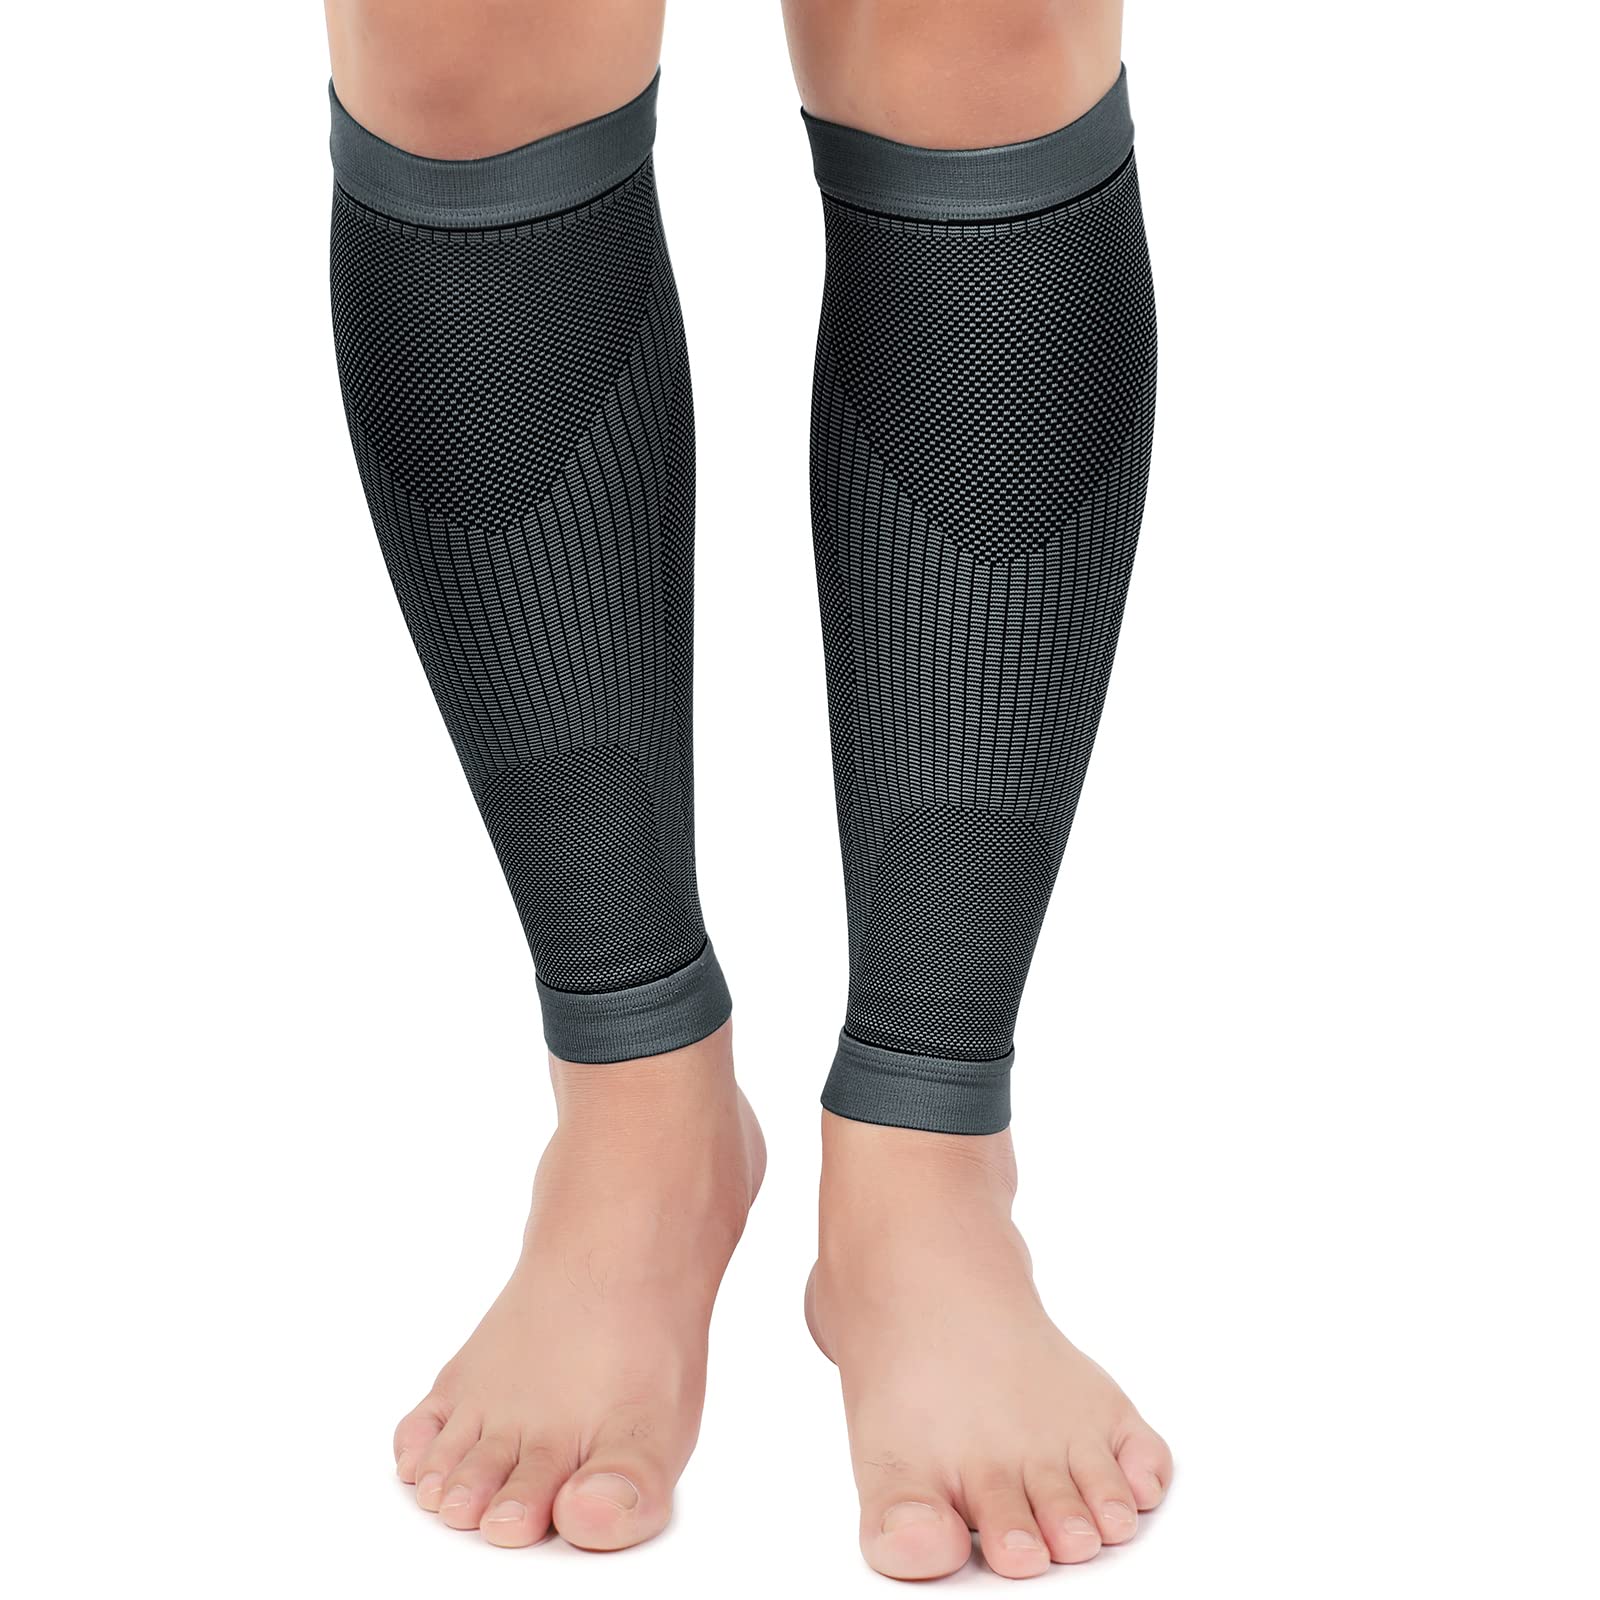 KEKING Full Leg Compression Sleeves, Unisex, Thigh High Compression  Stocking 20-30mmHg Graduated Support for Thigh Calf Knee, Running,  Basketball, Reduce Varicose Veins and Swelling, 1 Pair, Black M Medium Black